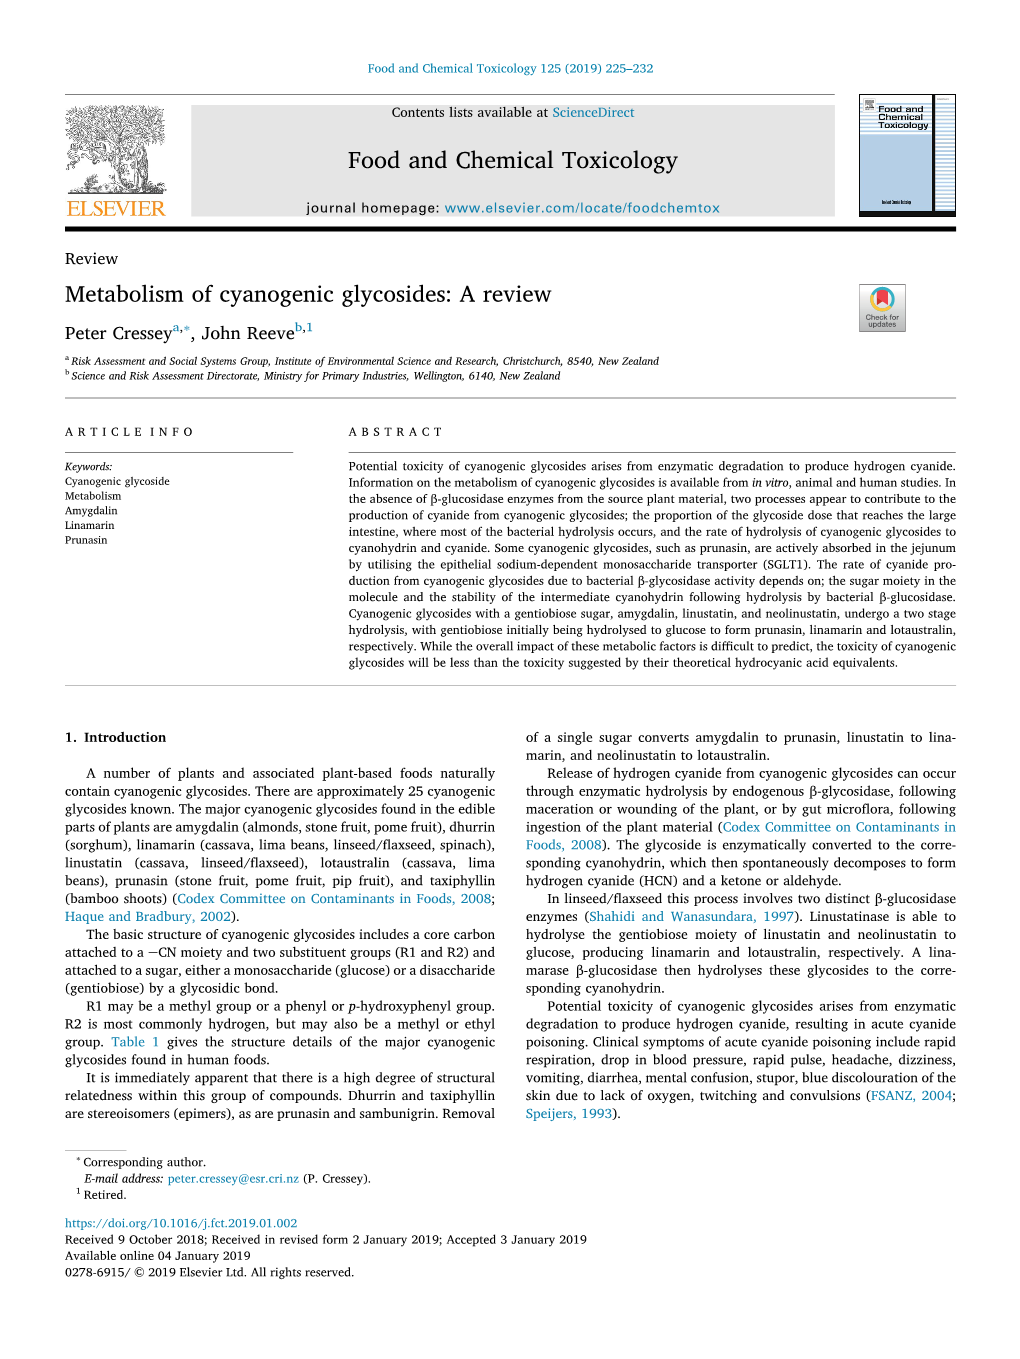 Metabolism of Cyanogenic Glycosides a Review